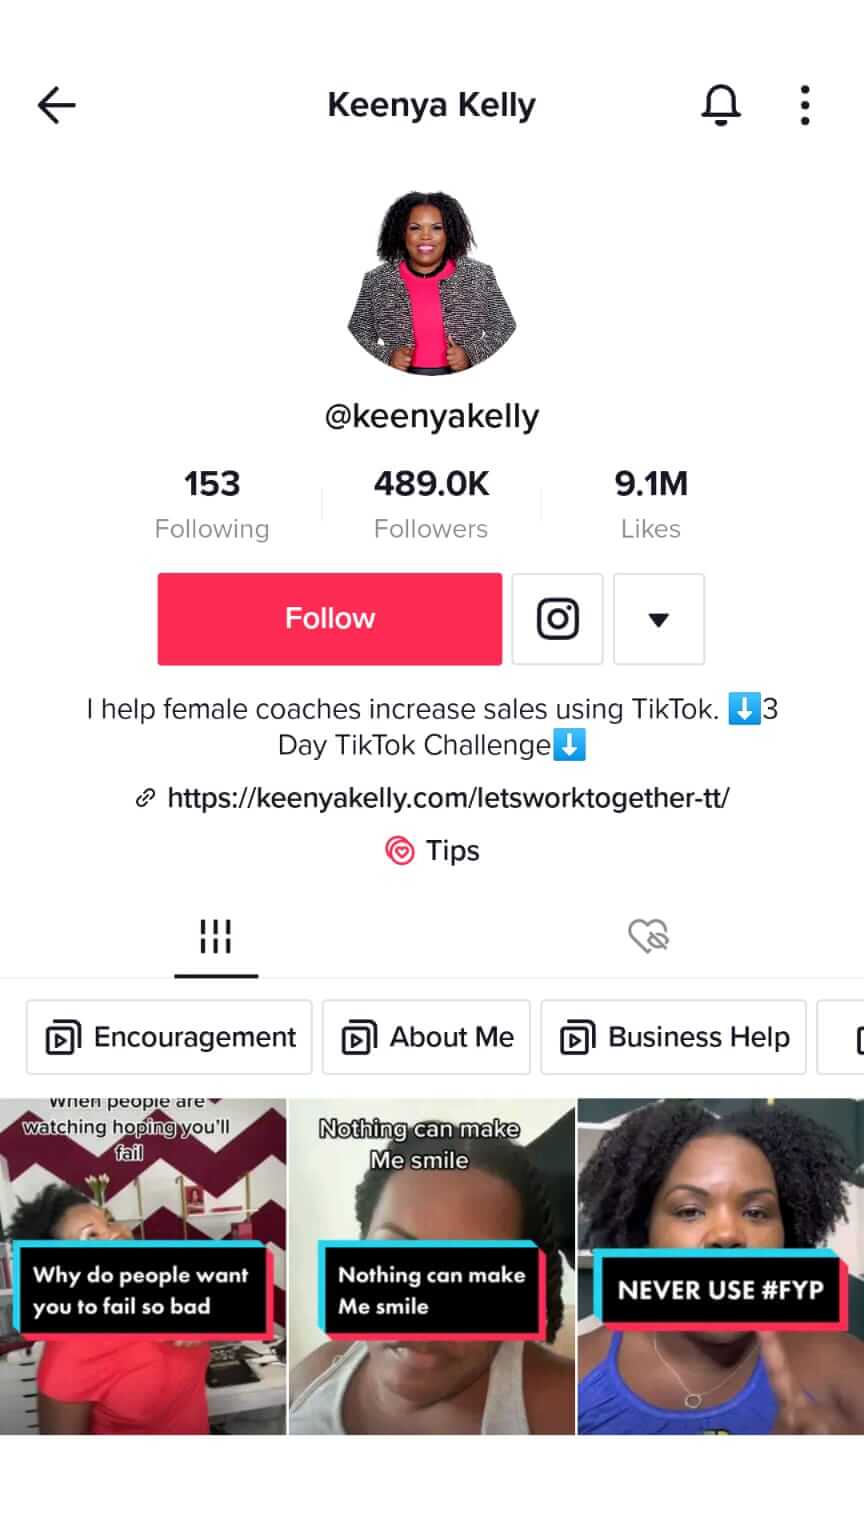 how-to-capture-leads-from-tiktok-sharing-links-bio-who-you-serve-link-keenya-kelly-example-12